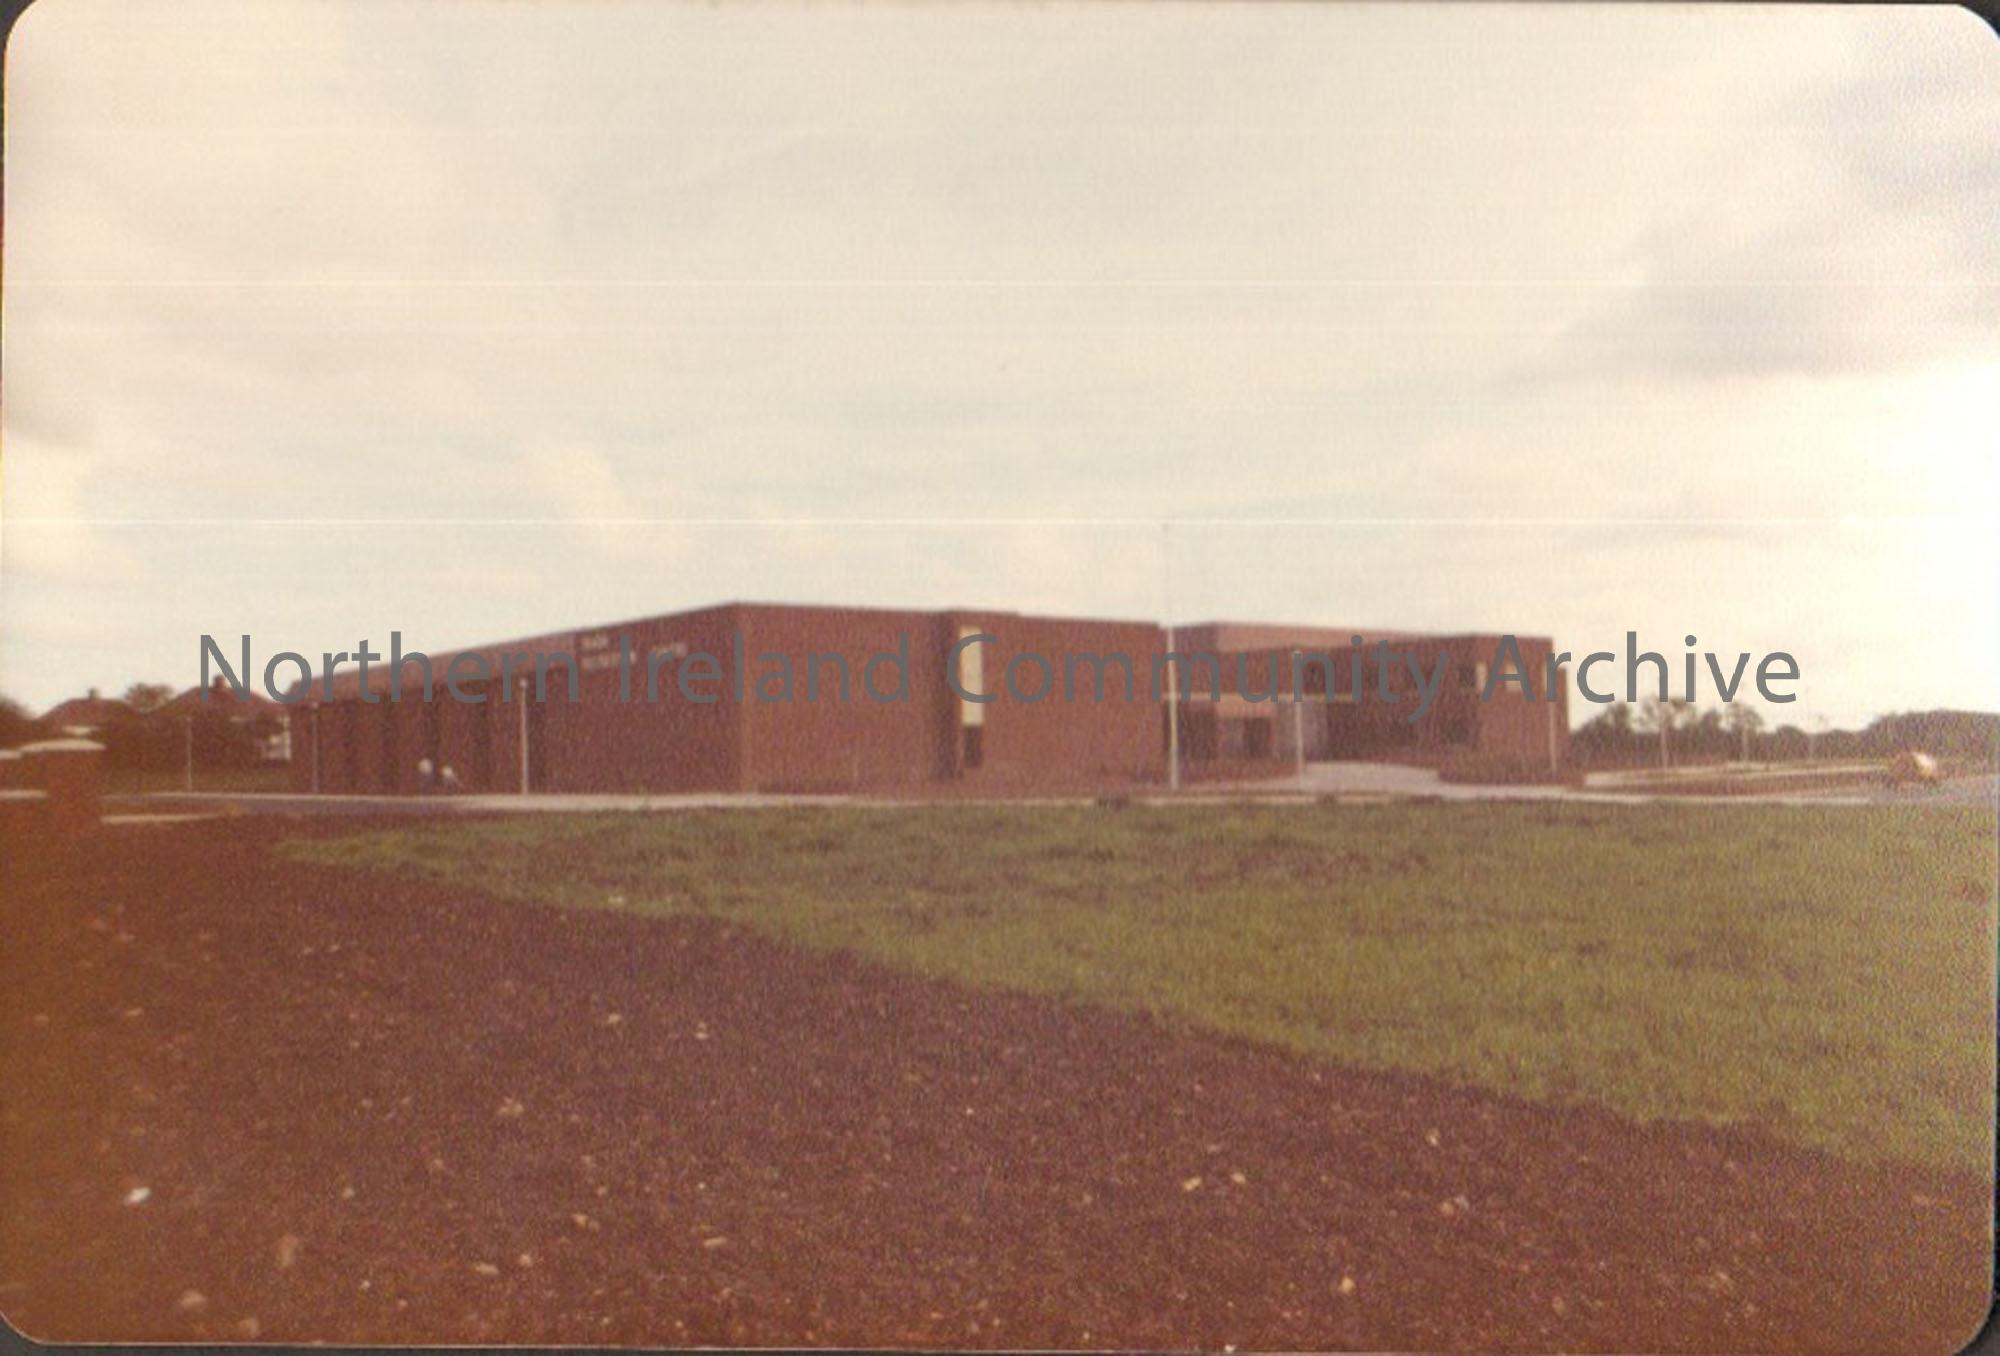 Colour photograph of Riada Recreation Centre. Large brown square building with ploughed land and recently planted grass in front of it.